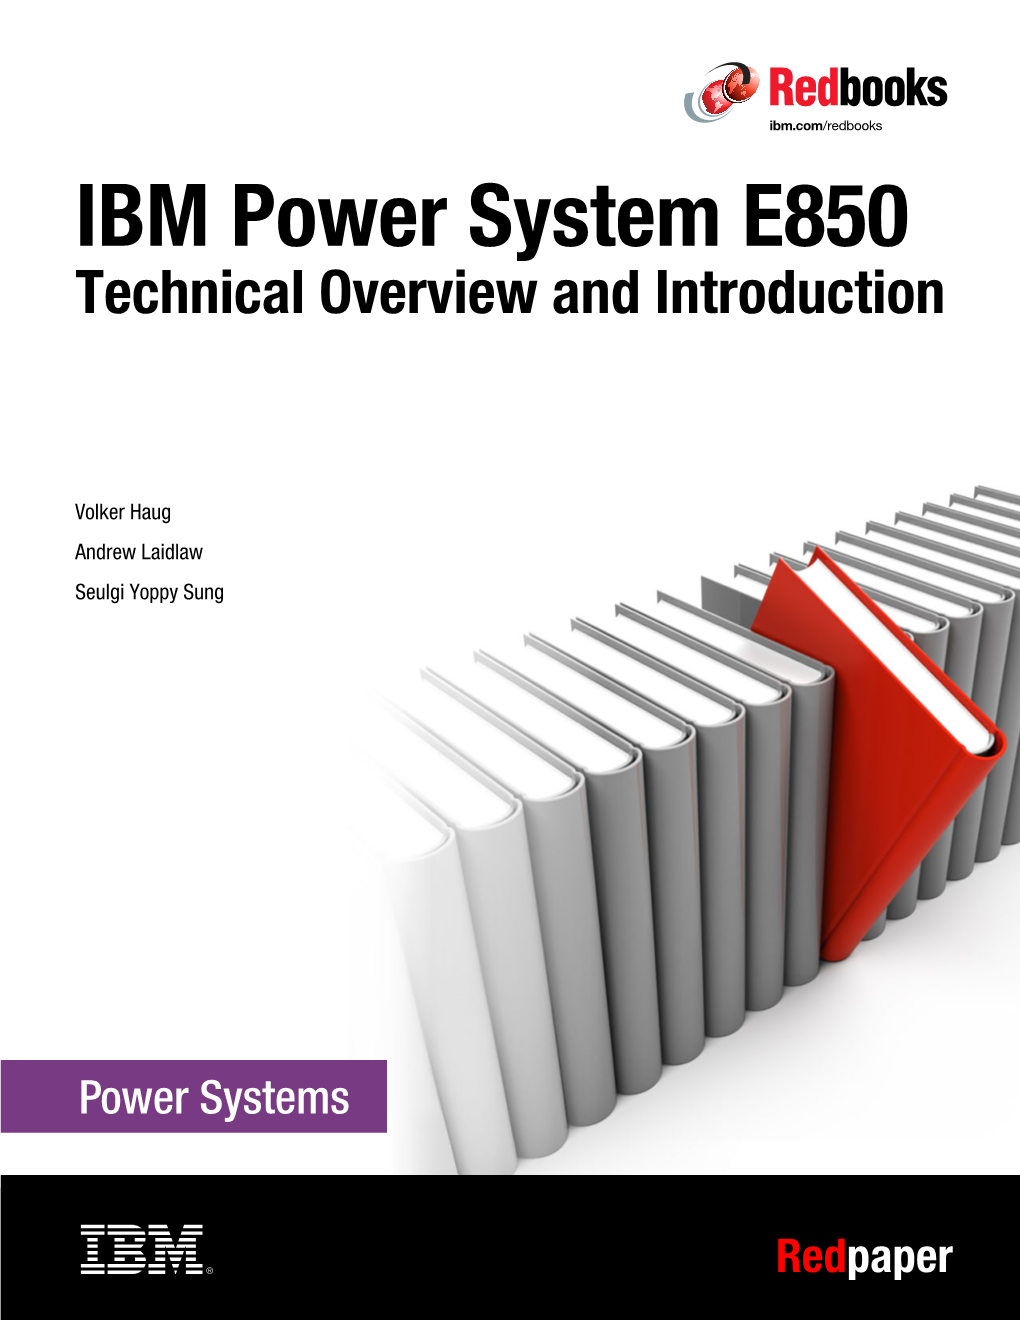 IBM Power Systems E850 Technical Overview and Introduction